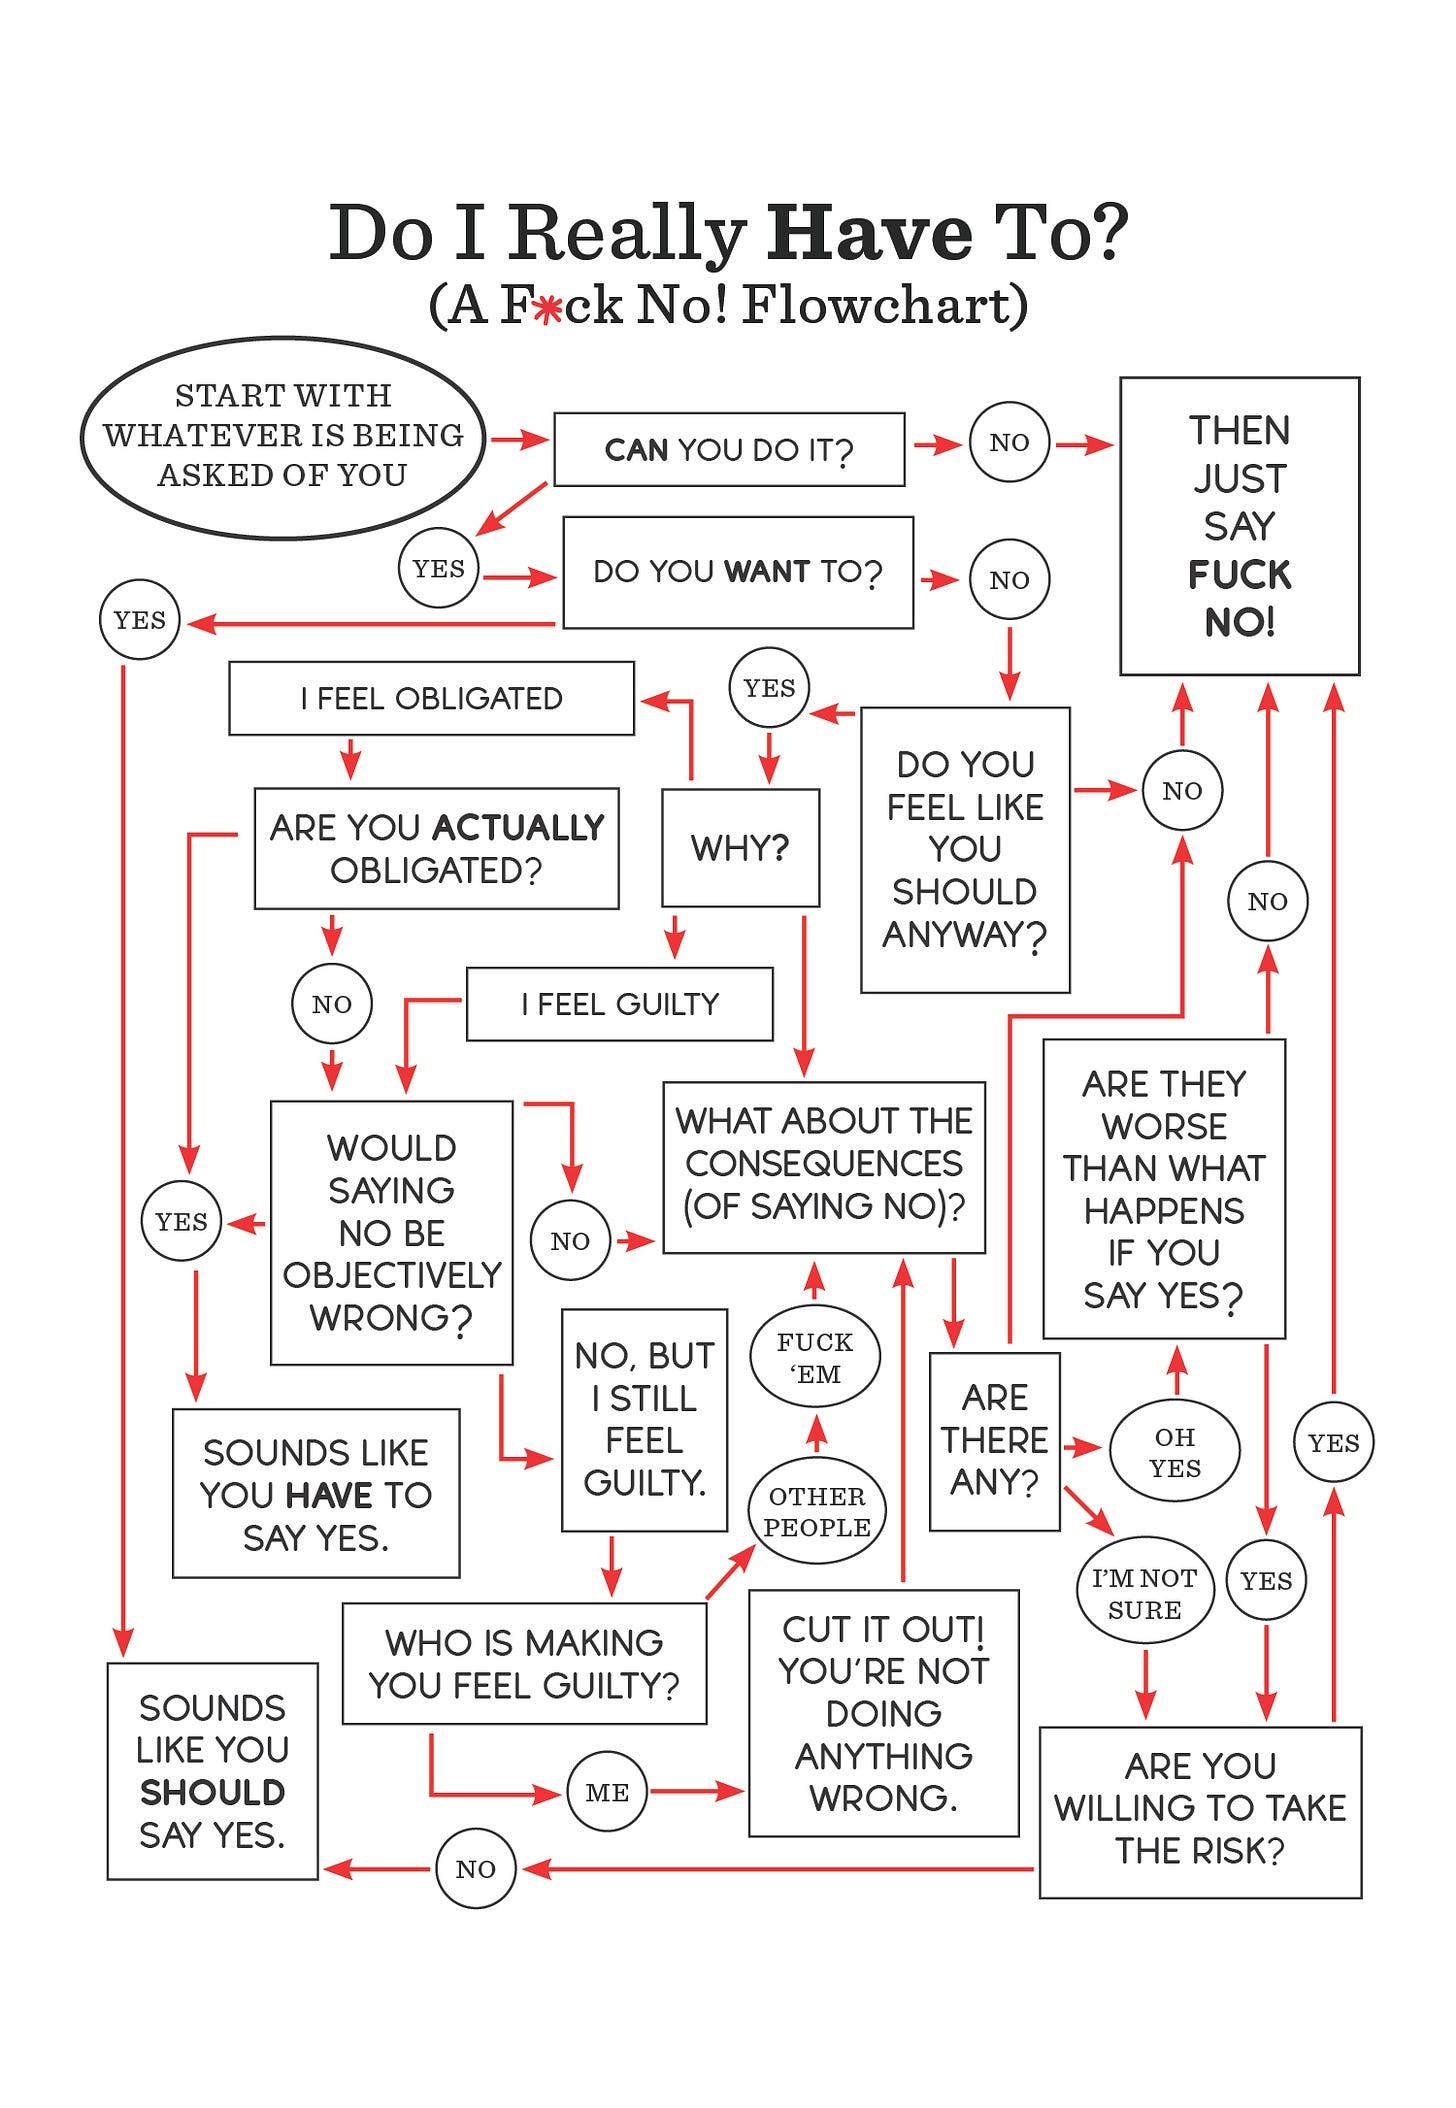 A flowchart from my book FUCK NO